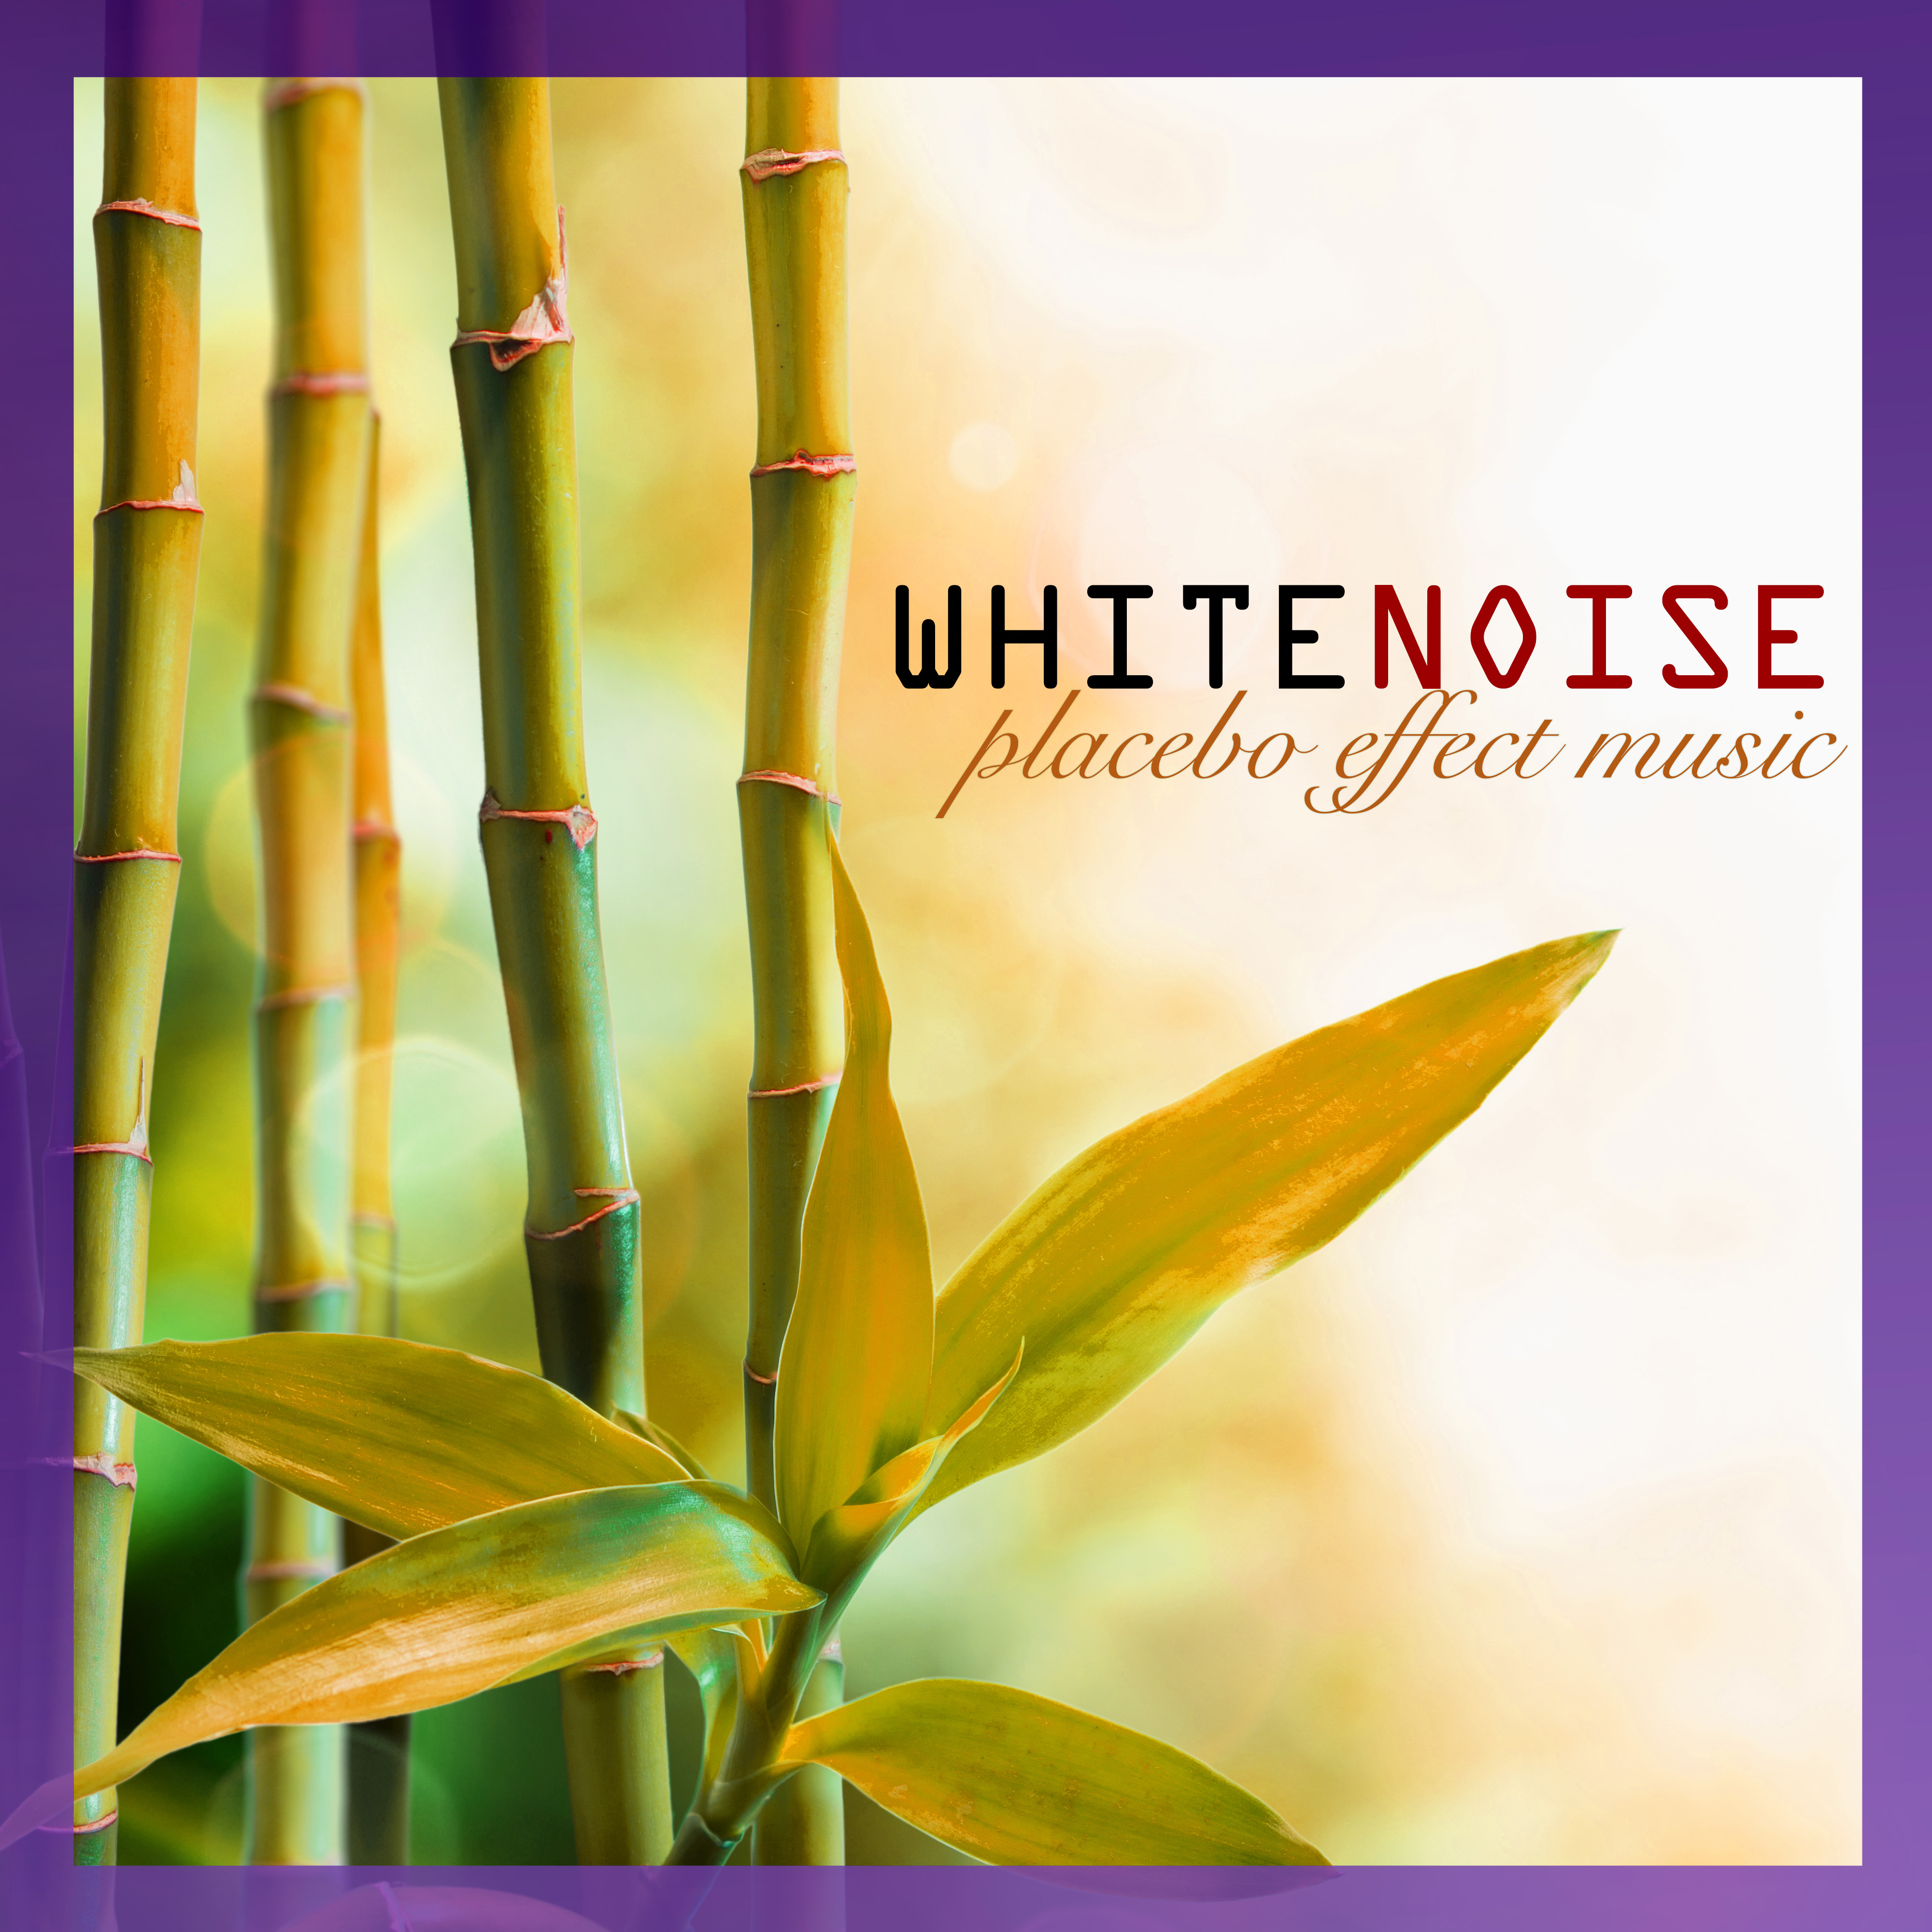 White Noise - Mindfulness Meditation Nature Sounds for Relax, Placebo Effect Music for Deep Relaxation